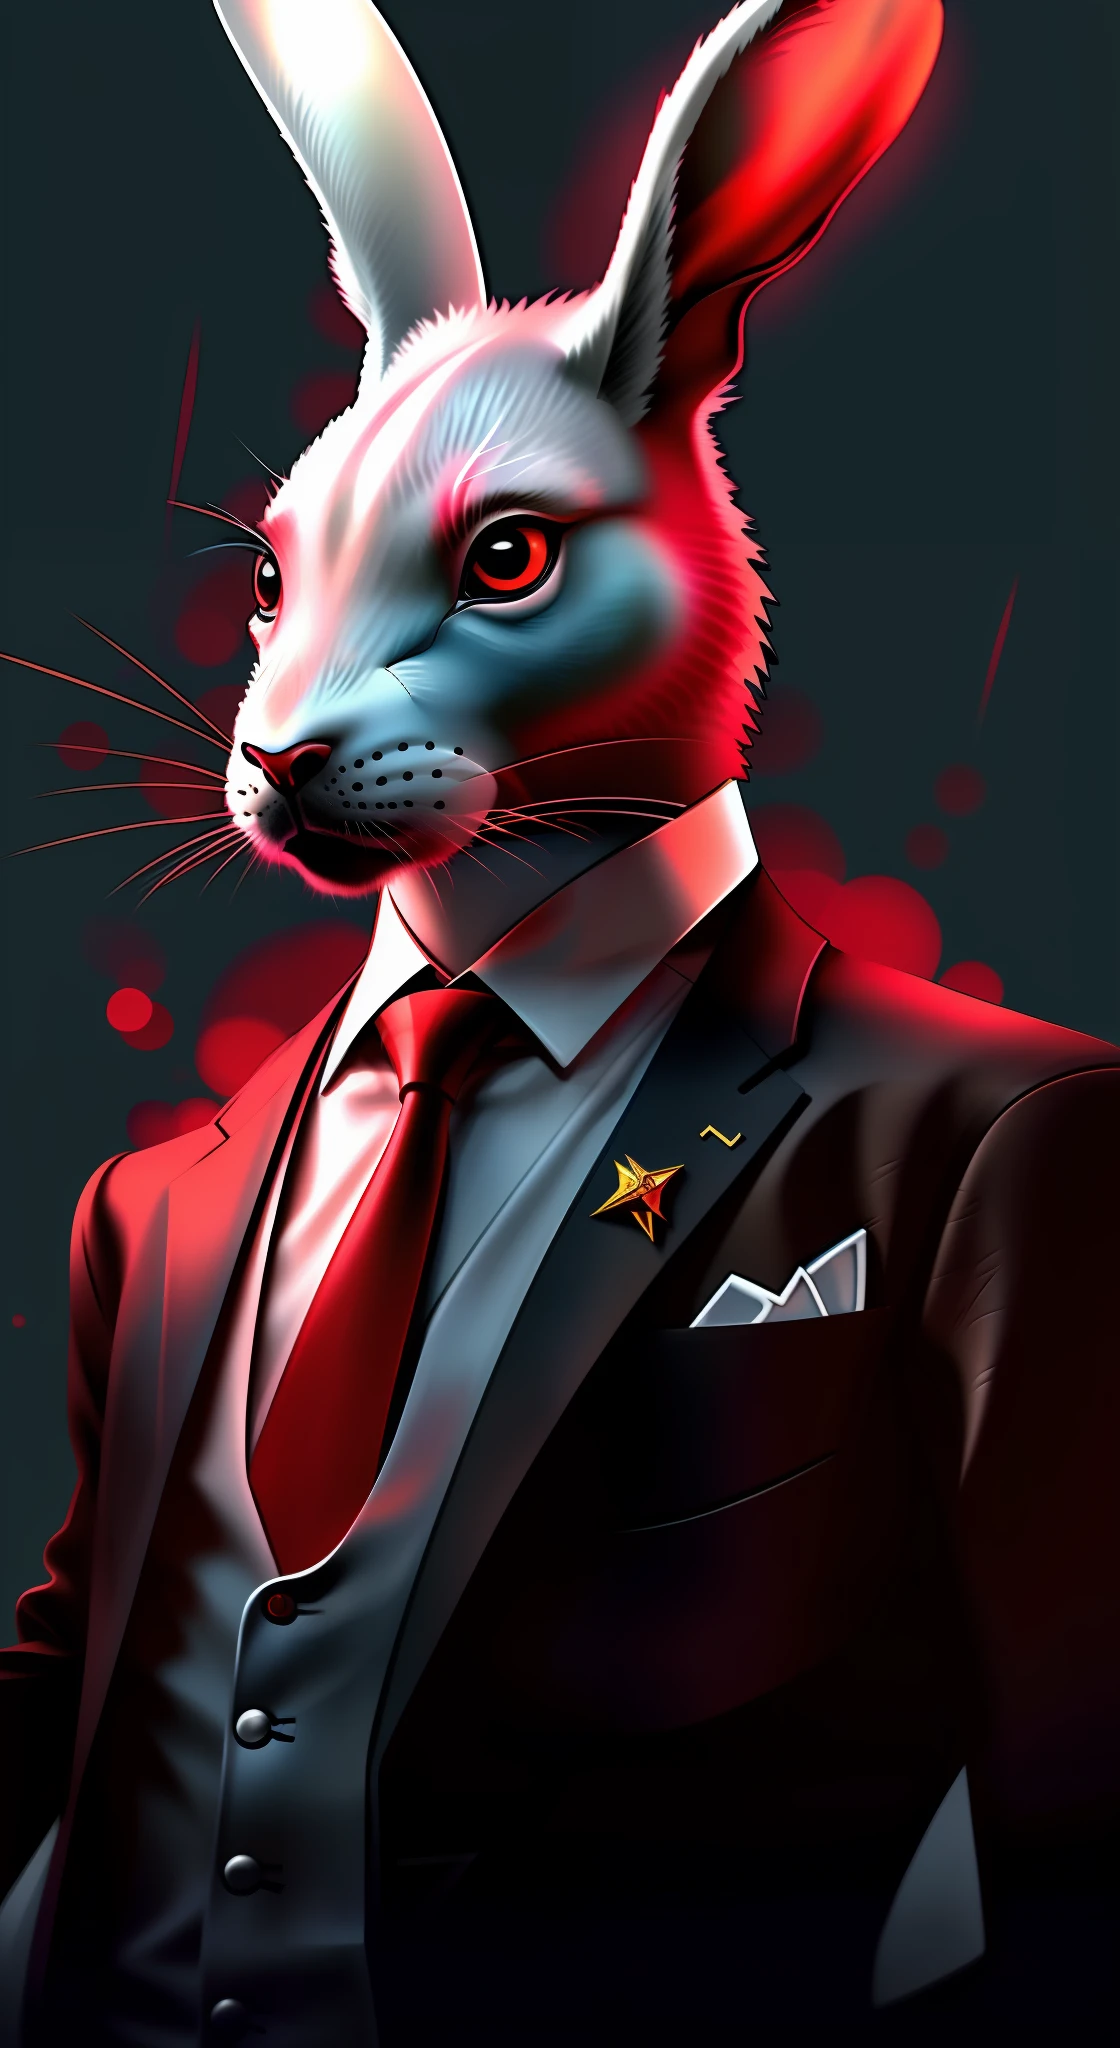 a close up of a rabbit in a suit with a tie, masterpiece anthro portrait, epic and classy portrait, from hotline miami, in his suit, dressed in a suit, Direction: Adam Marczyński, anthro art, high-quality portrait, well - dressed, anthropomorphic rabbit, an anthropomorphic gangster rat